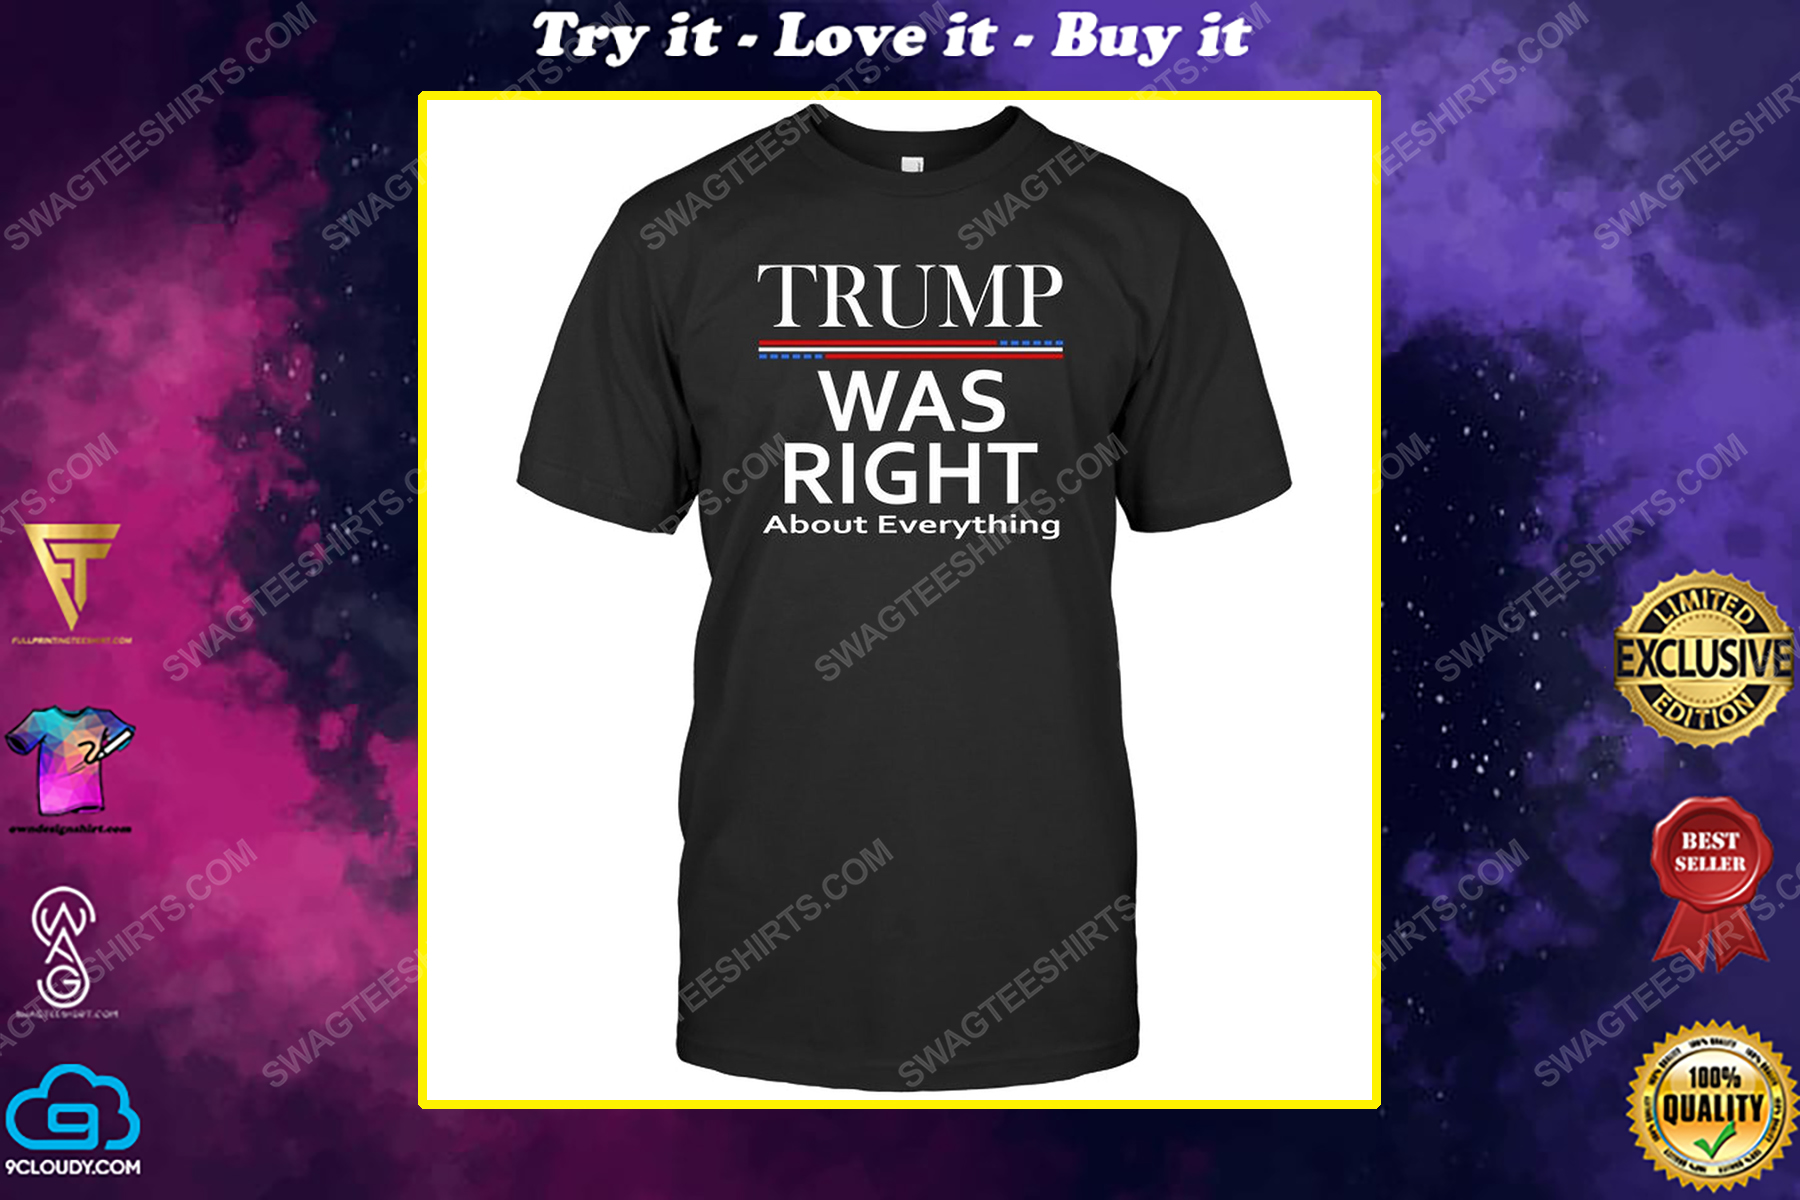 Trump was right about everything political shirt